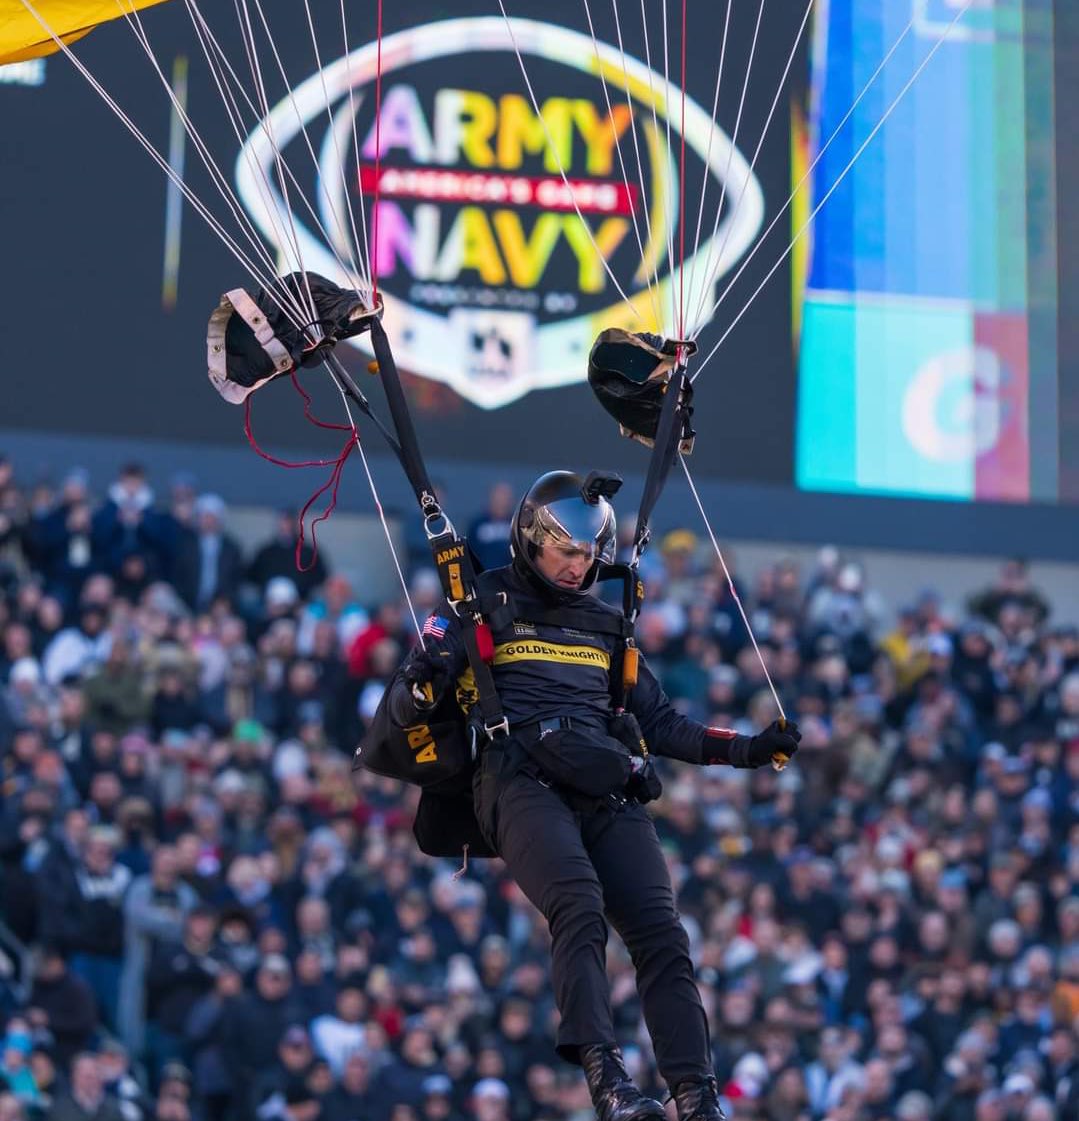 #EOD’s Devin Diaz jumped into the Army Beat Navy Game! Bringing victory with him! #GoArmyBeatNavy #goarmyeod @ArmyGK